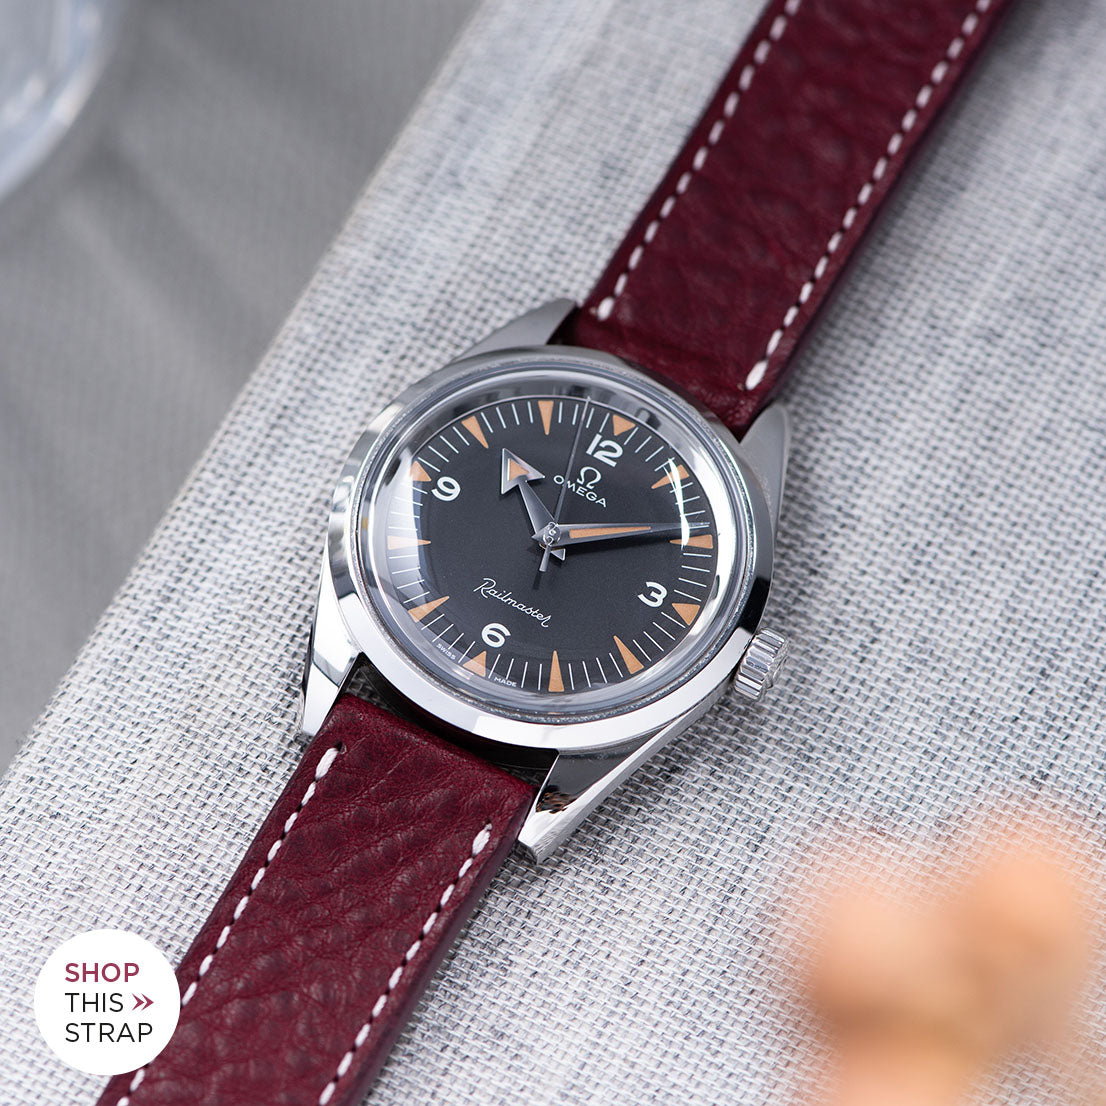 Bulang and Sons_Strap Guide_The Omega Railmaster_Burgundy Red Leather Watch Strap